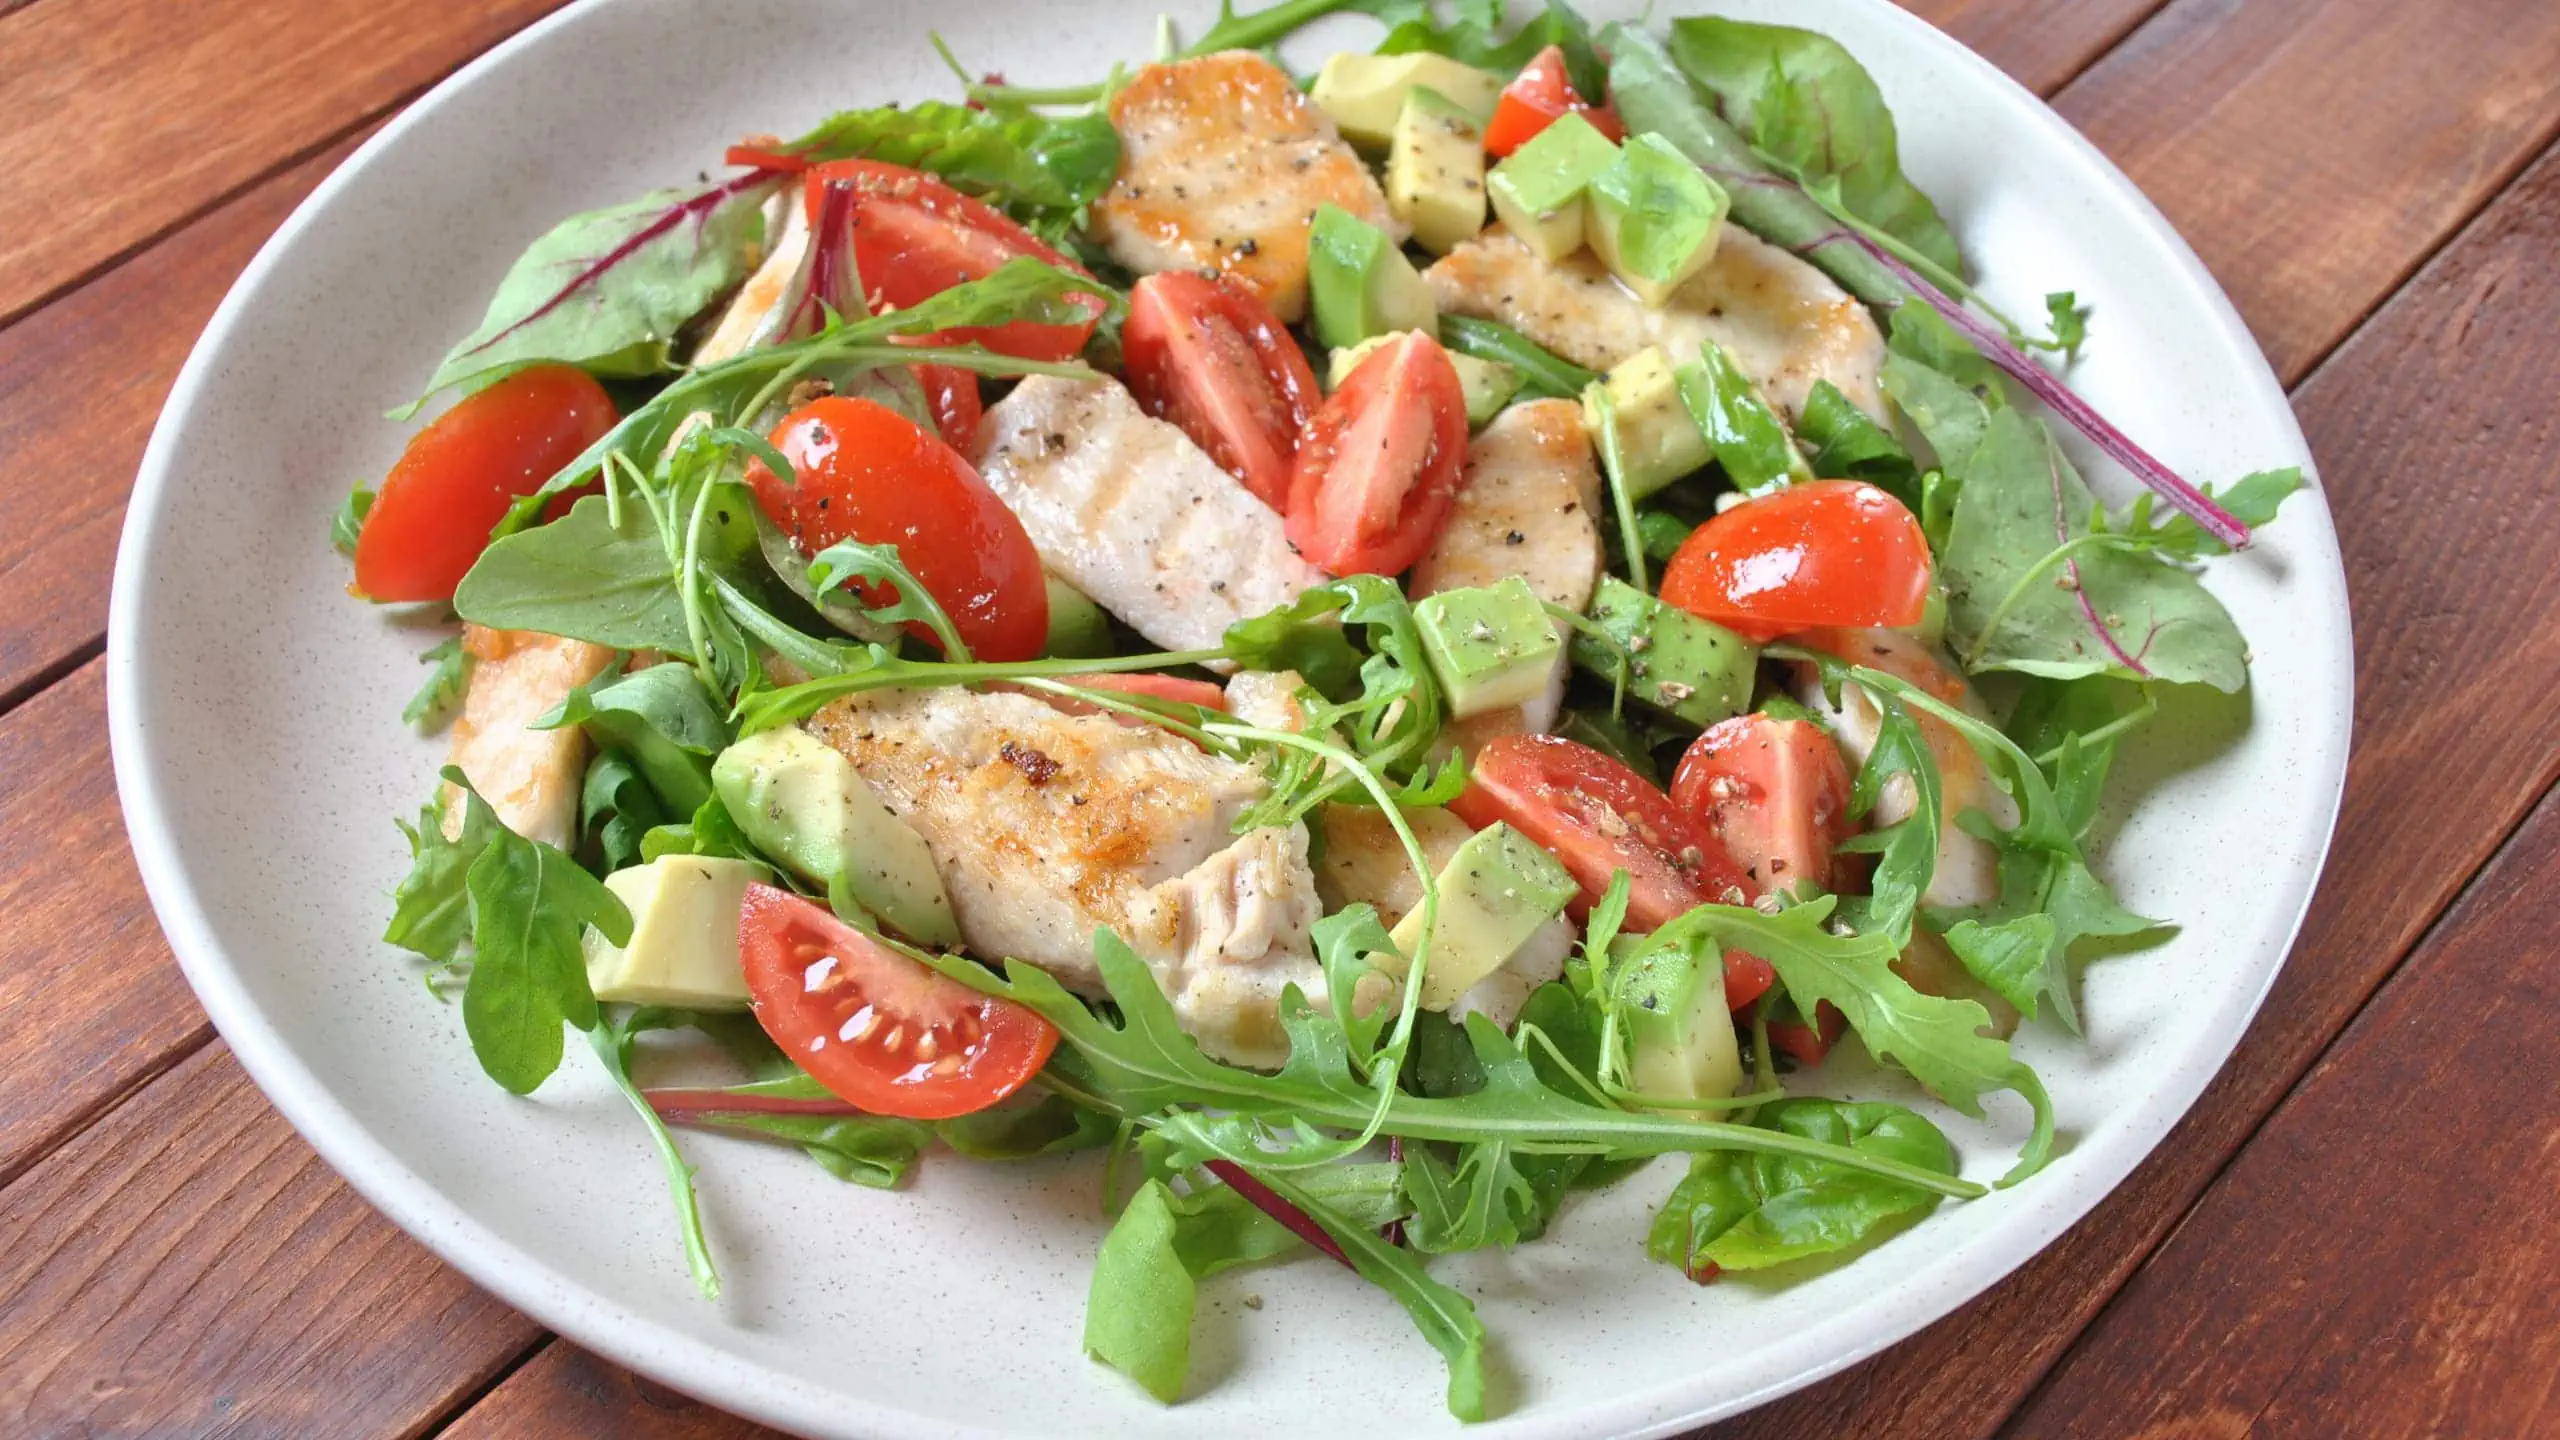 Slimming World chicken salad with avocado, cherry tomatoes, arugula, and beet leaves